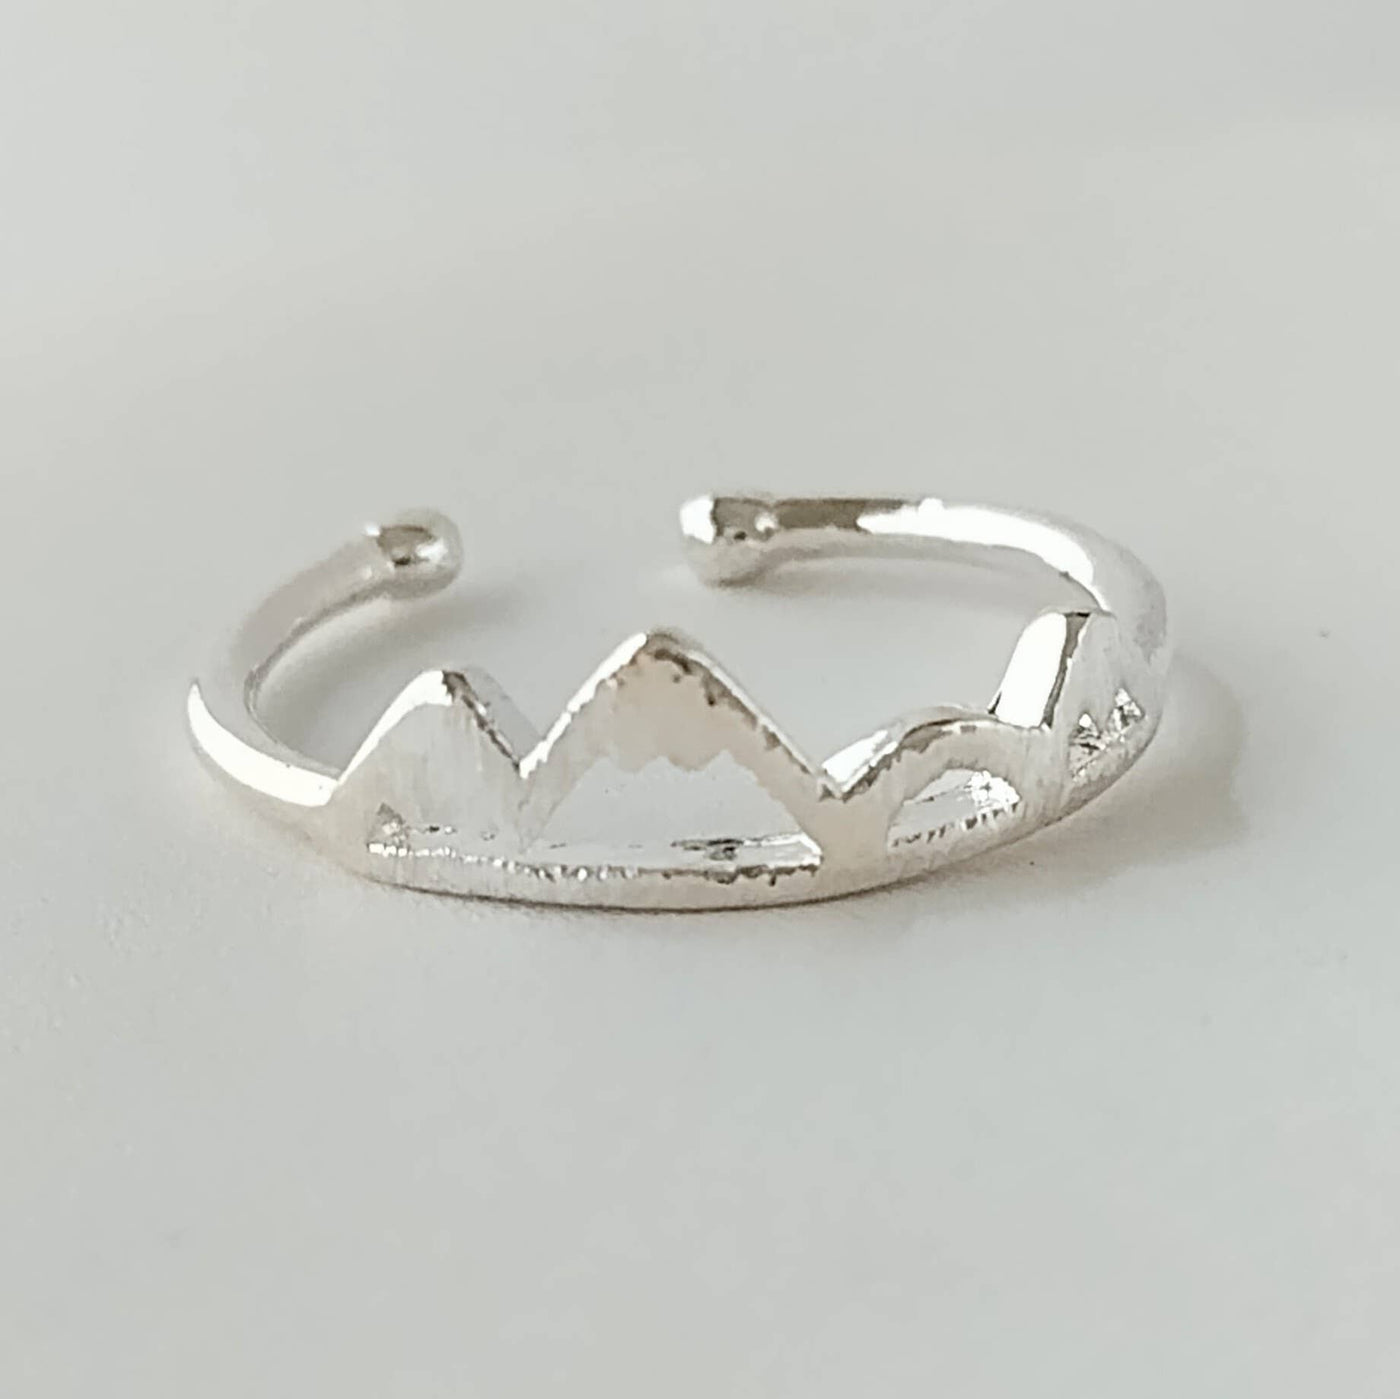 Tiny Mountain Ring, Wanderlust Ring: Silver